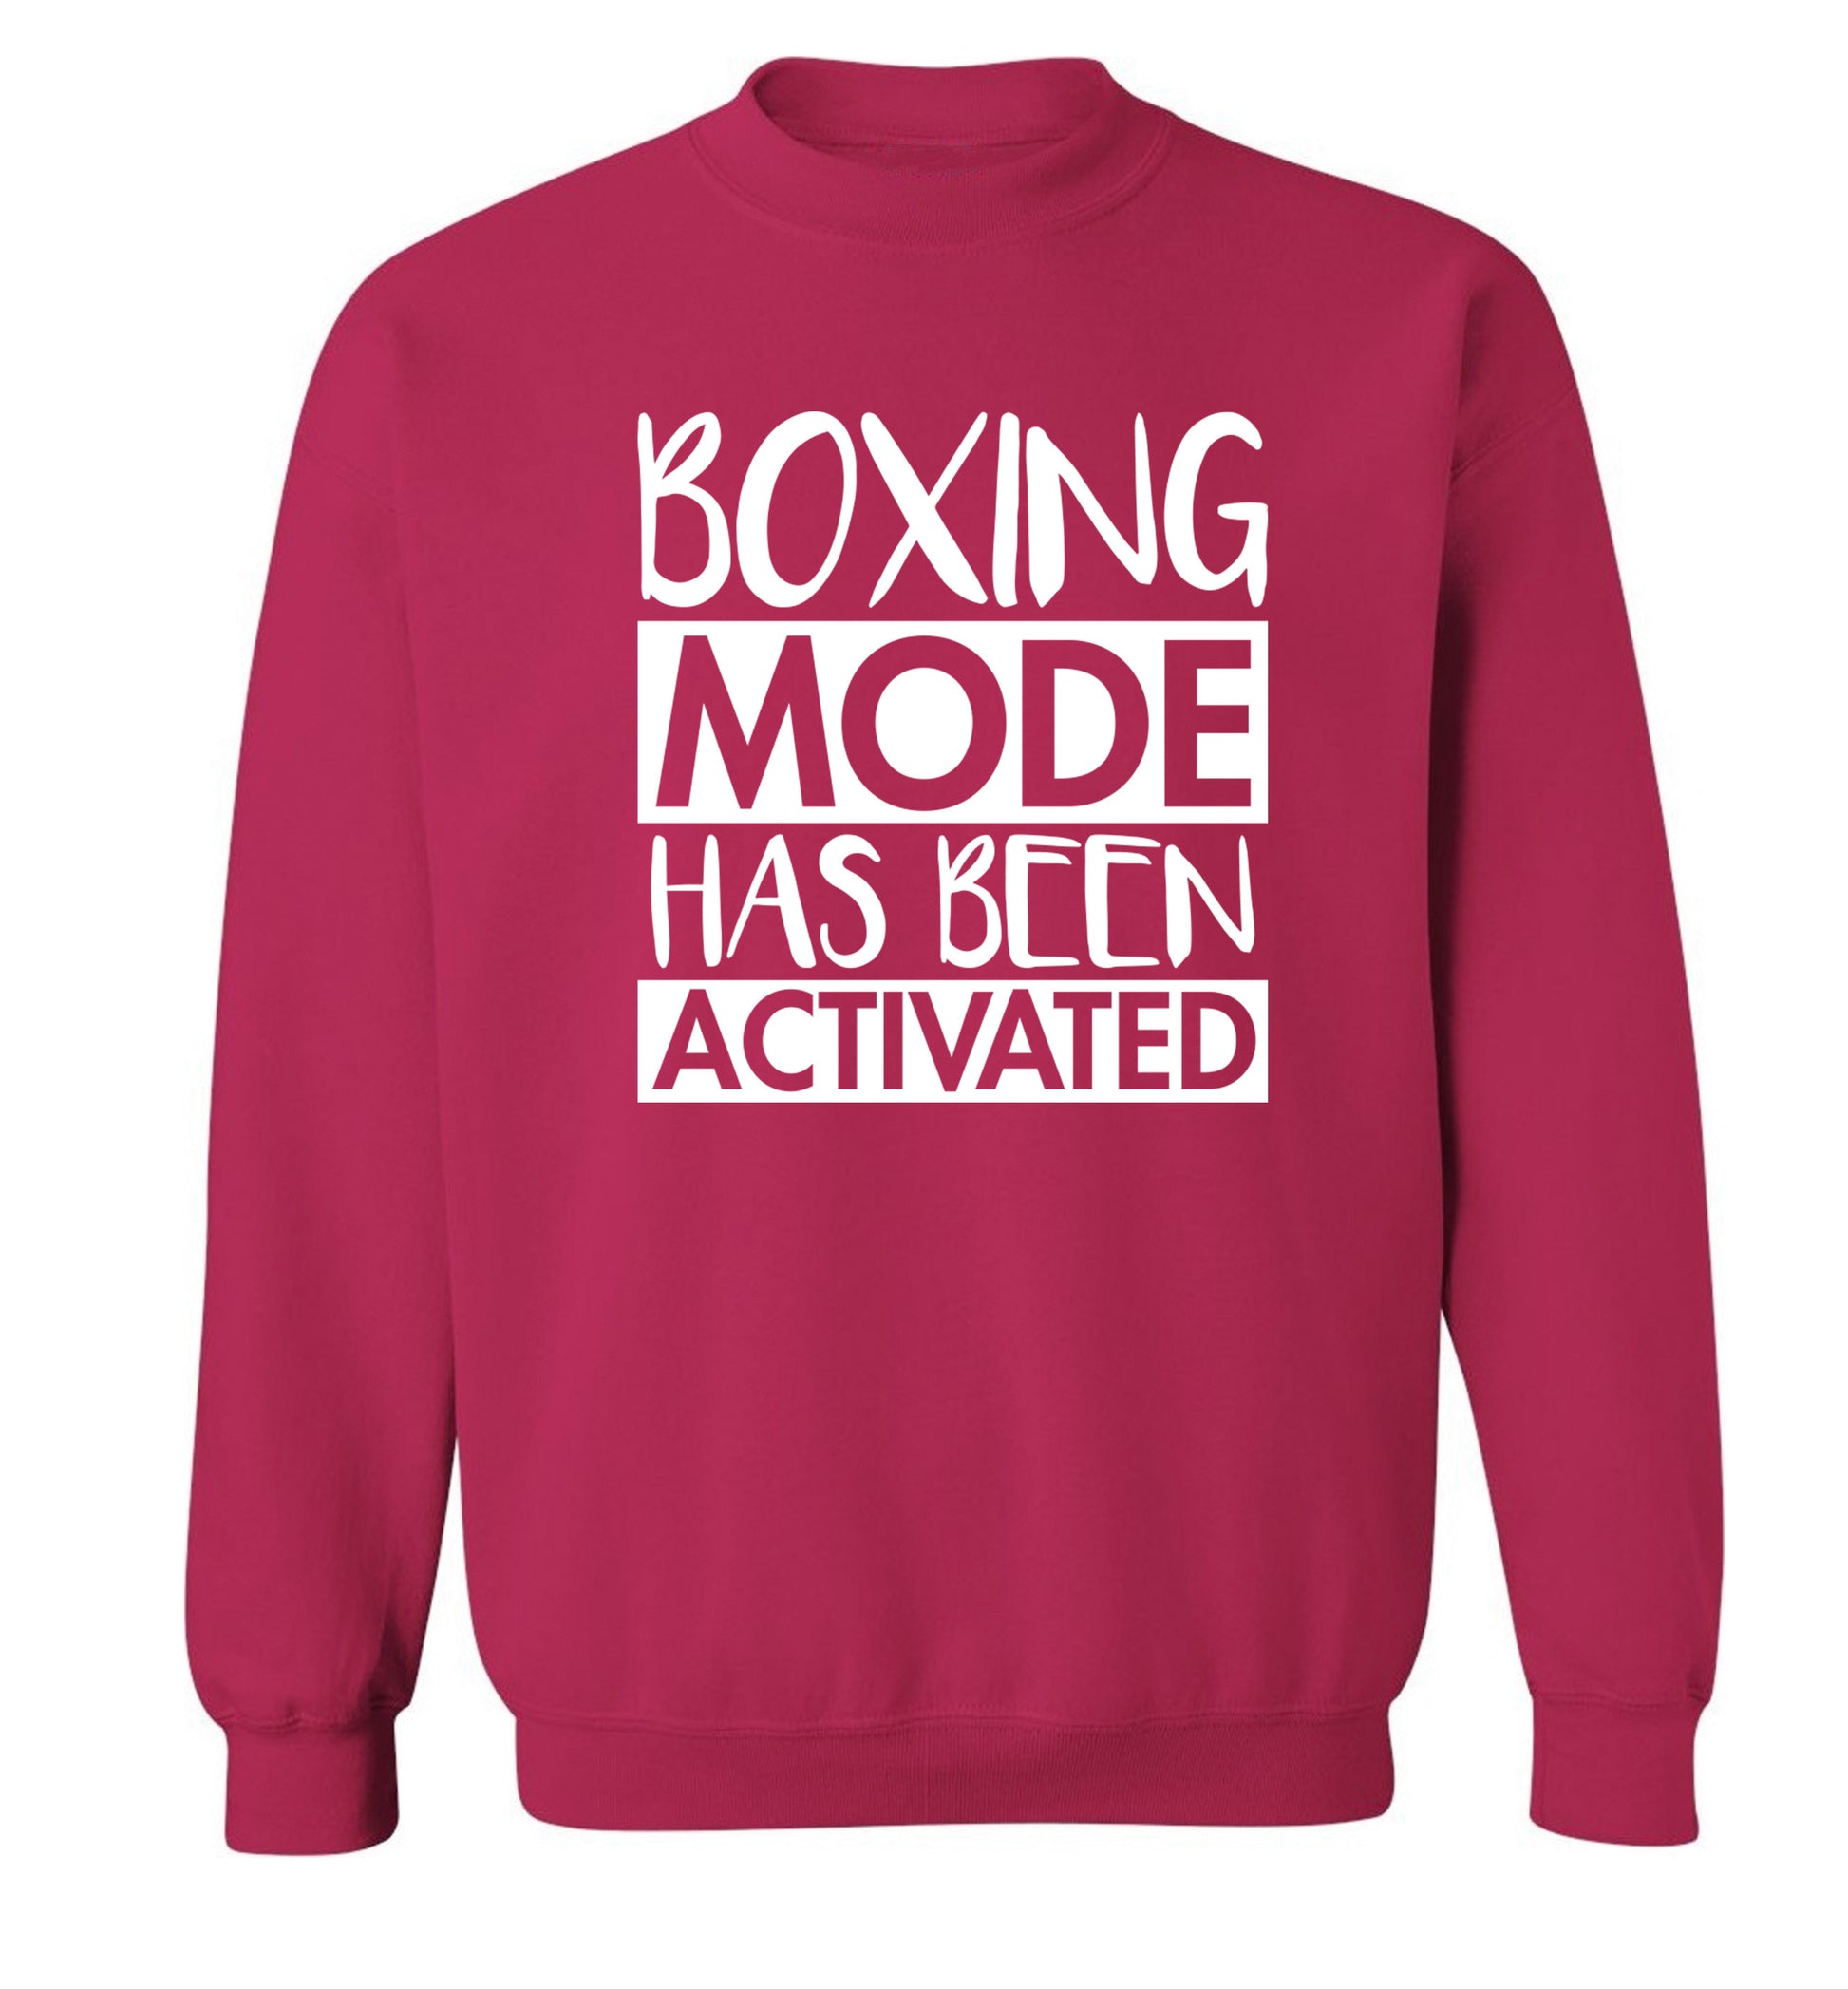 Boxing mode activated Adult's unisex pink Sweater 2XL